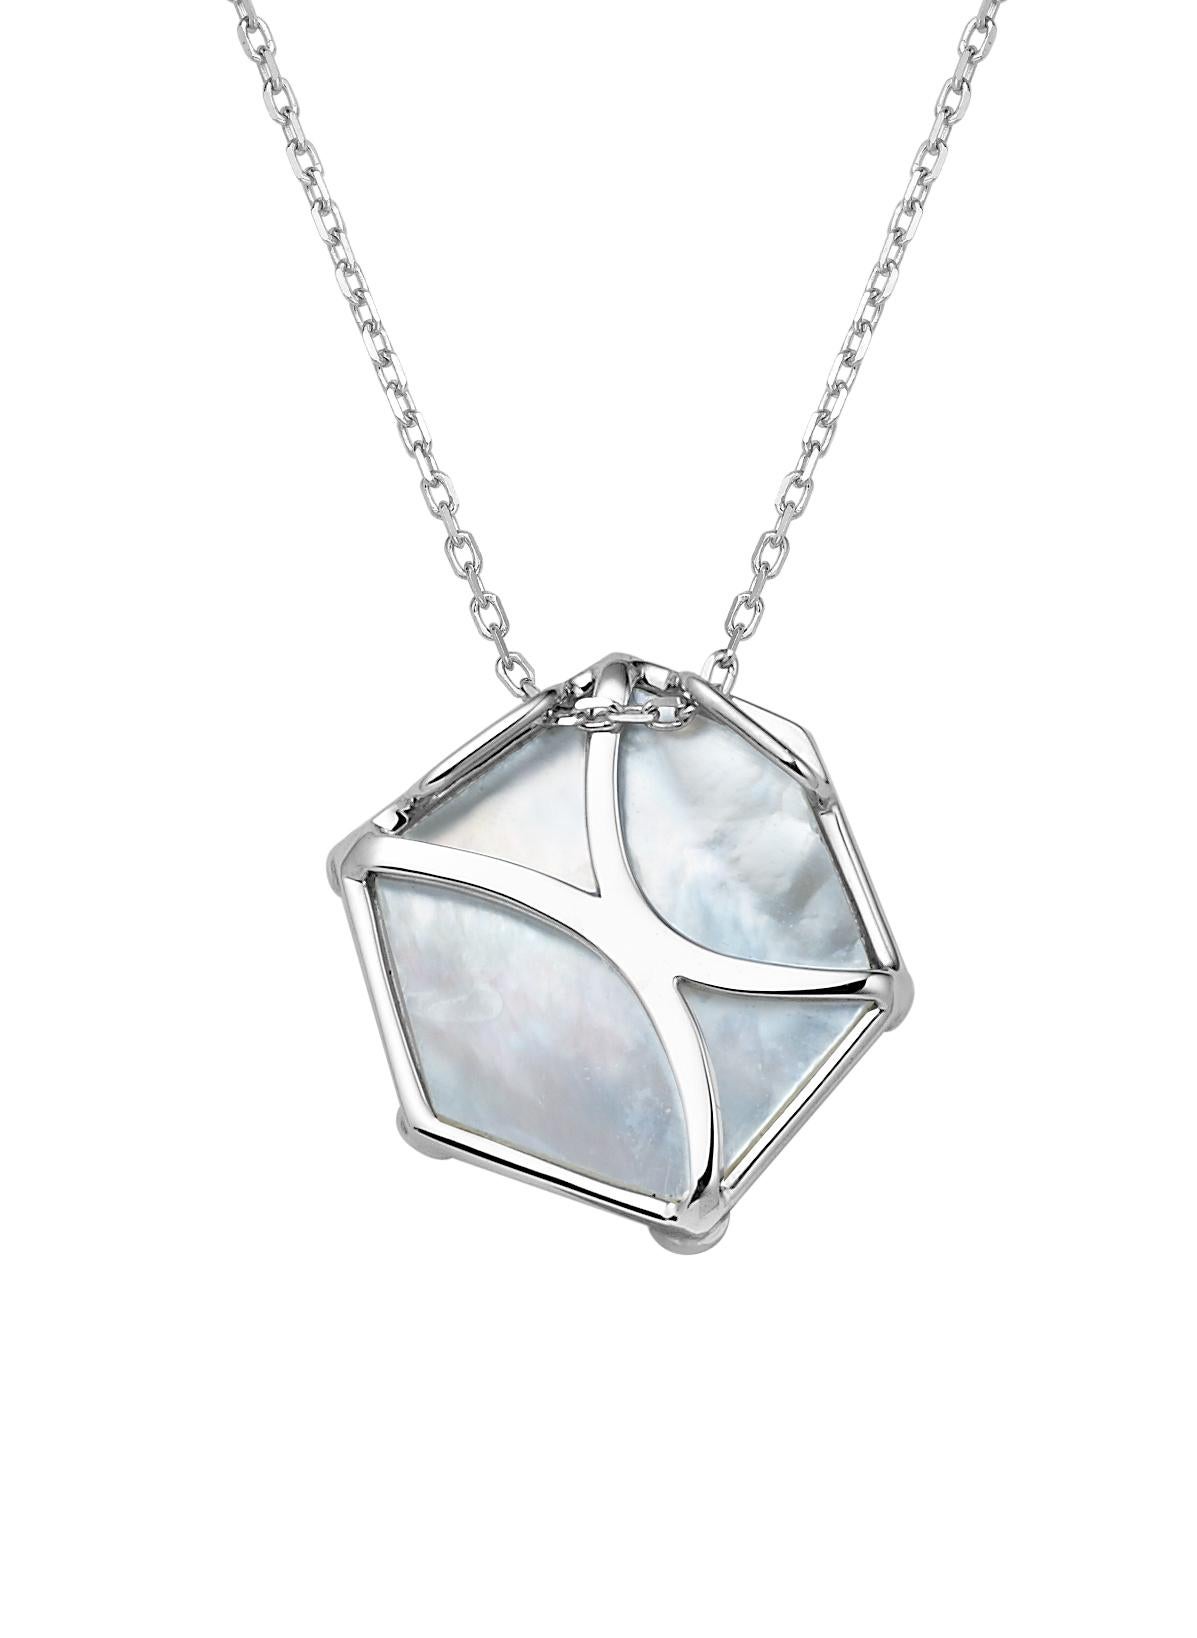 Description:
Nova large hexagon pendant 0.086ct white diamonds and 3.5ct mother of pearl, set in 18ct white gold with a high polish. Chain length is 16 inches + 2 inch extension.

Inspiration
The Nova Collection embodies the essence of freedom and